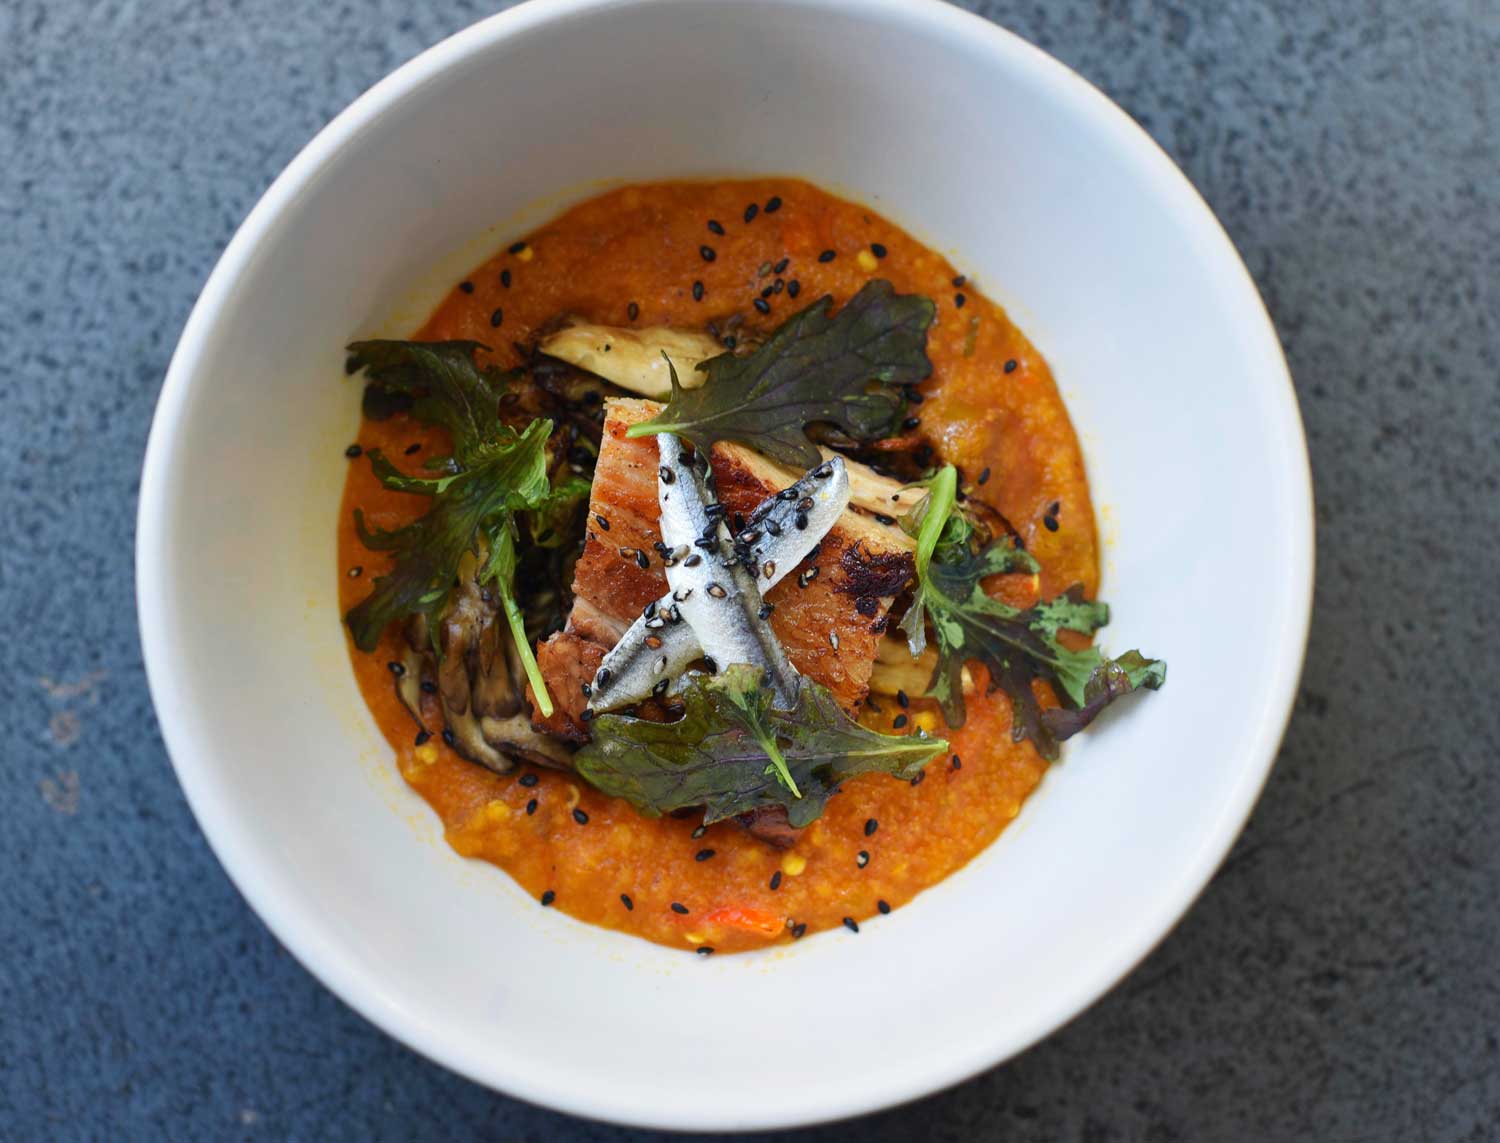 Colorful food is served at Prubechu, like this Chalakiles porridge with achiote, pork belly, and anchovies.